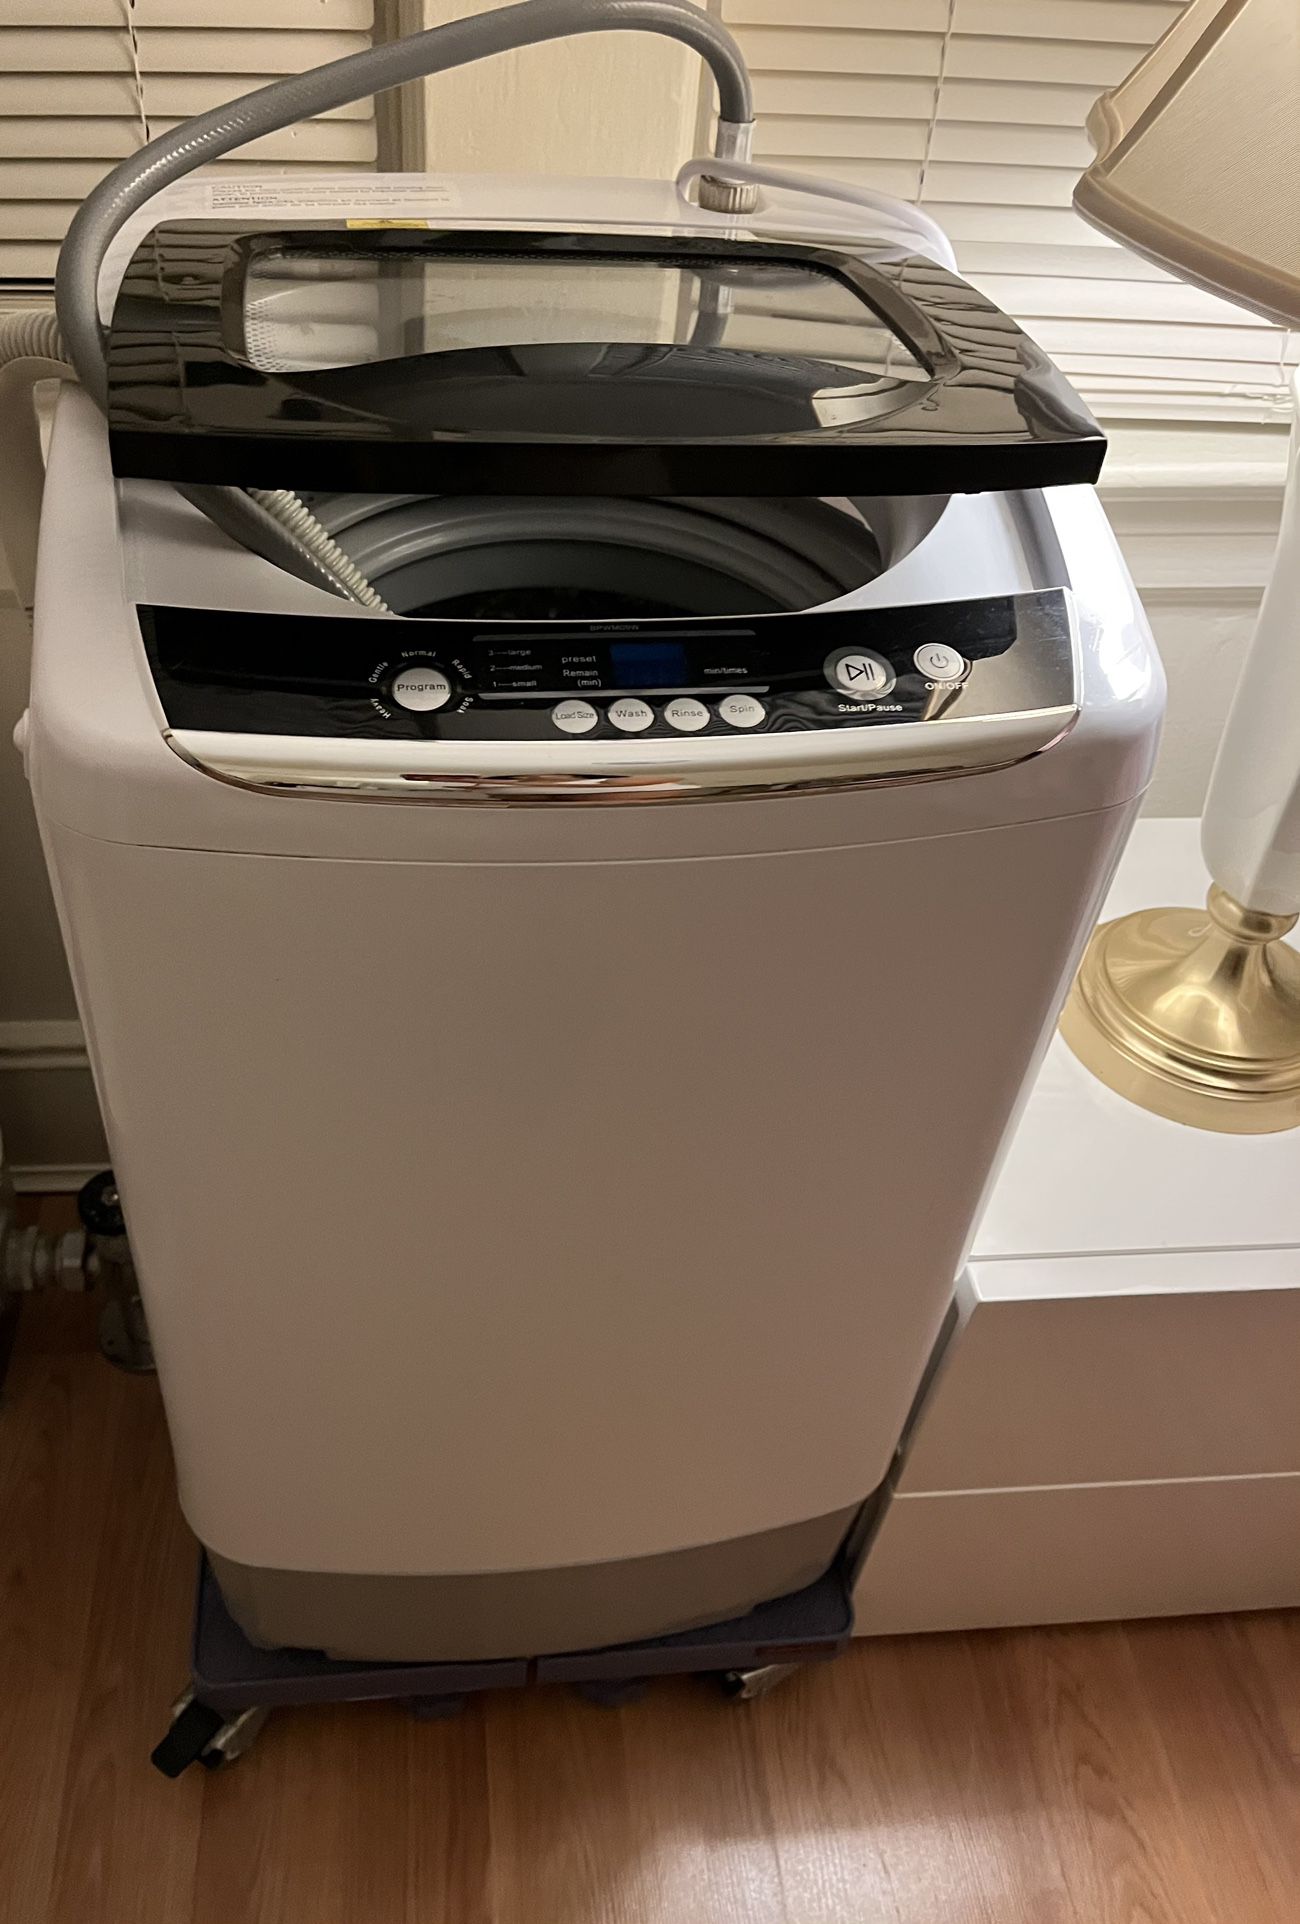 BRAND NEW Black+Decker Washing Machine for Sale in Queens, NY - OfferUp